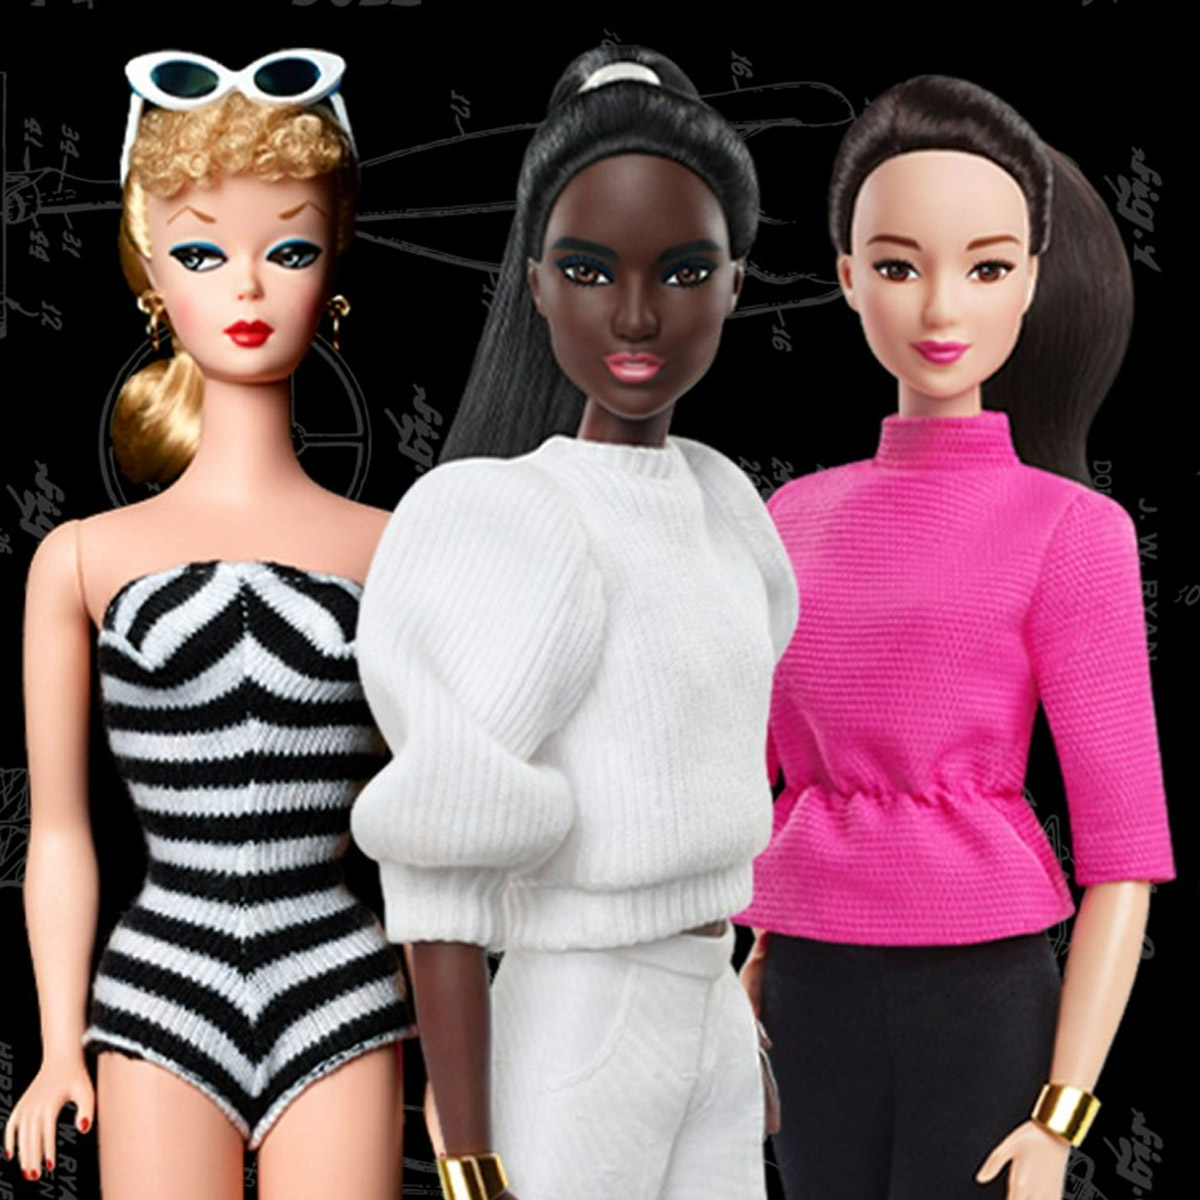 Shops at Crystals - promo - Barbie: A Cultural Icon Exhibition image